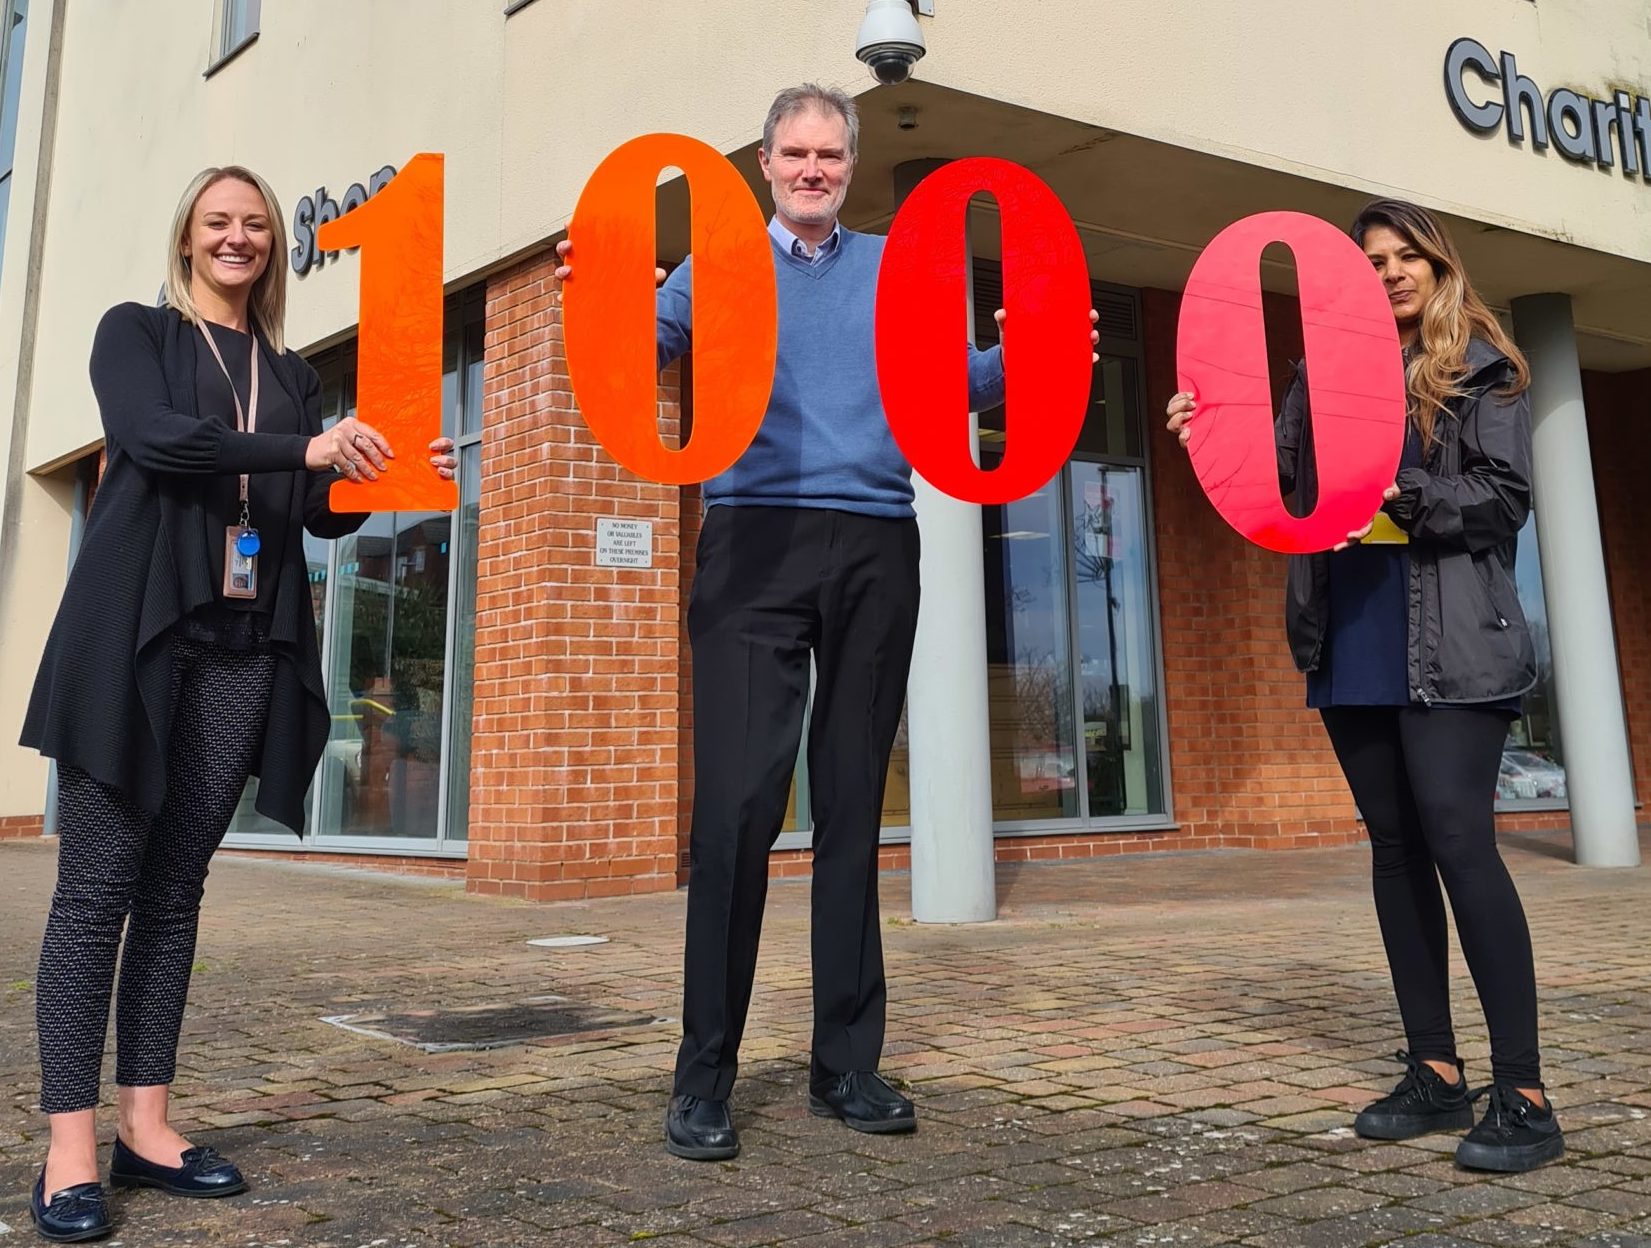 Photo of three of Beacon’s Engagement team, Becky on the left with blond hair, Pete the man in the middle and Meena on the right with long dark hair. They are stood outside the Beacon Centre and are holding up large Perspex numbers which spell out 1000.